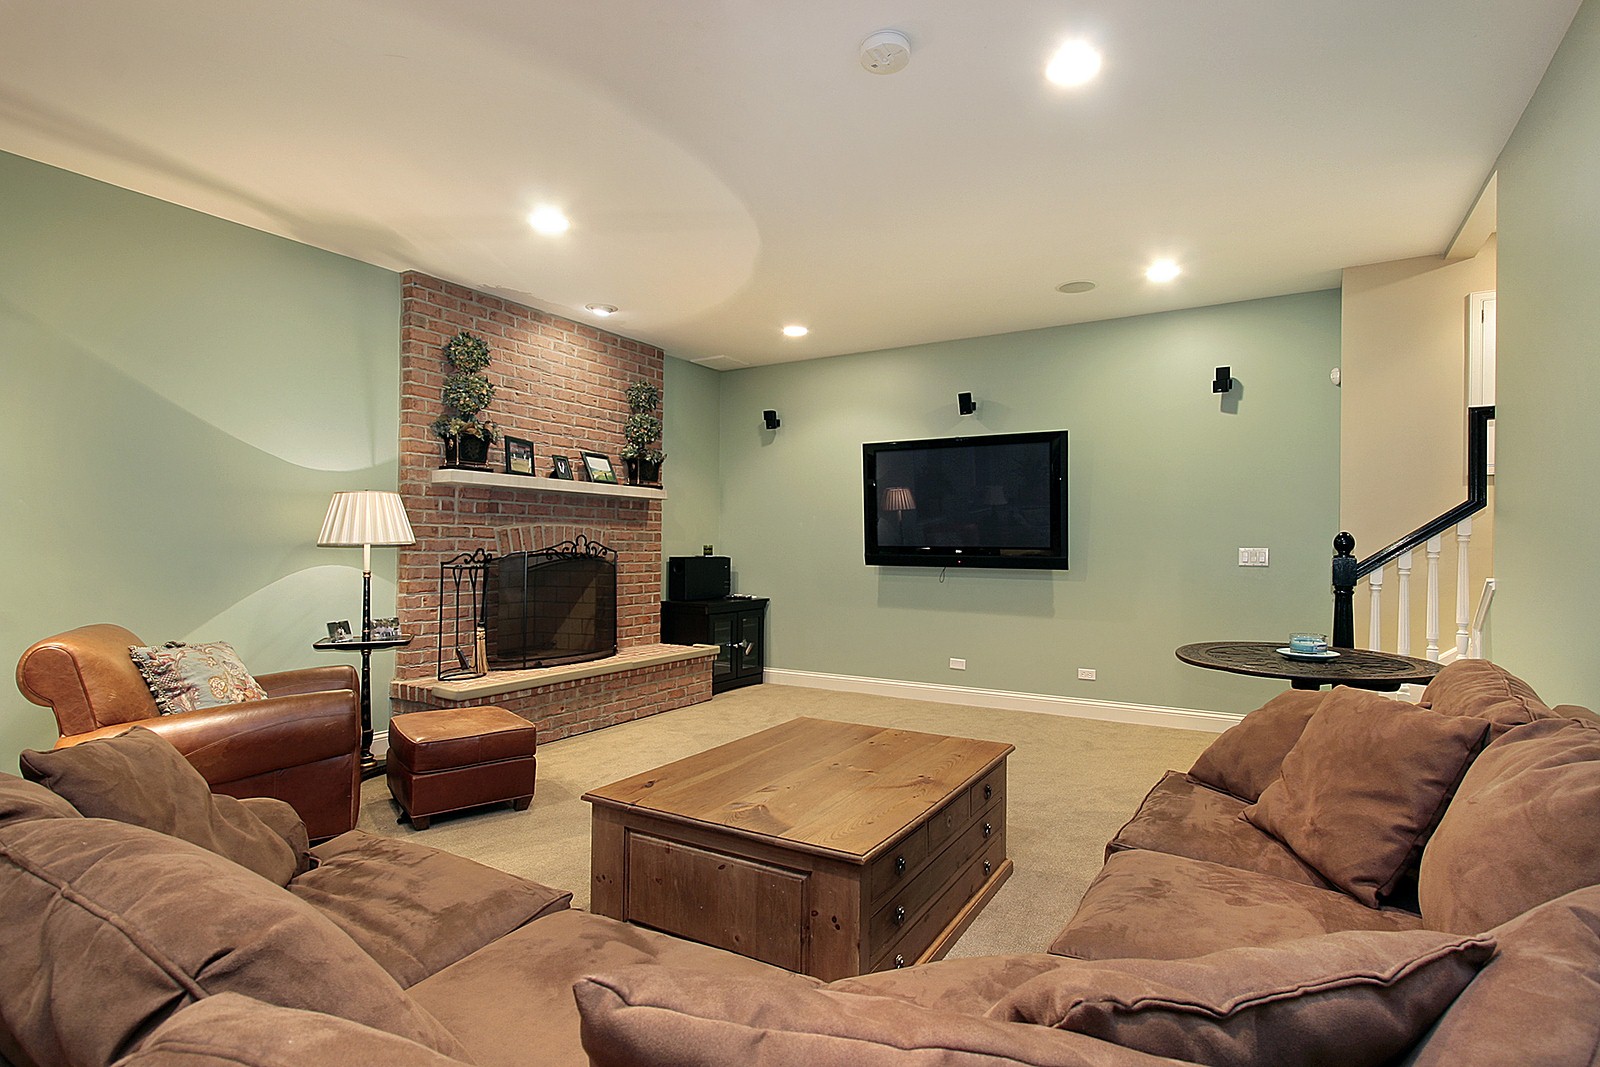 How Drain Tile Systems Help Your Home Basement Stay Dry